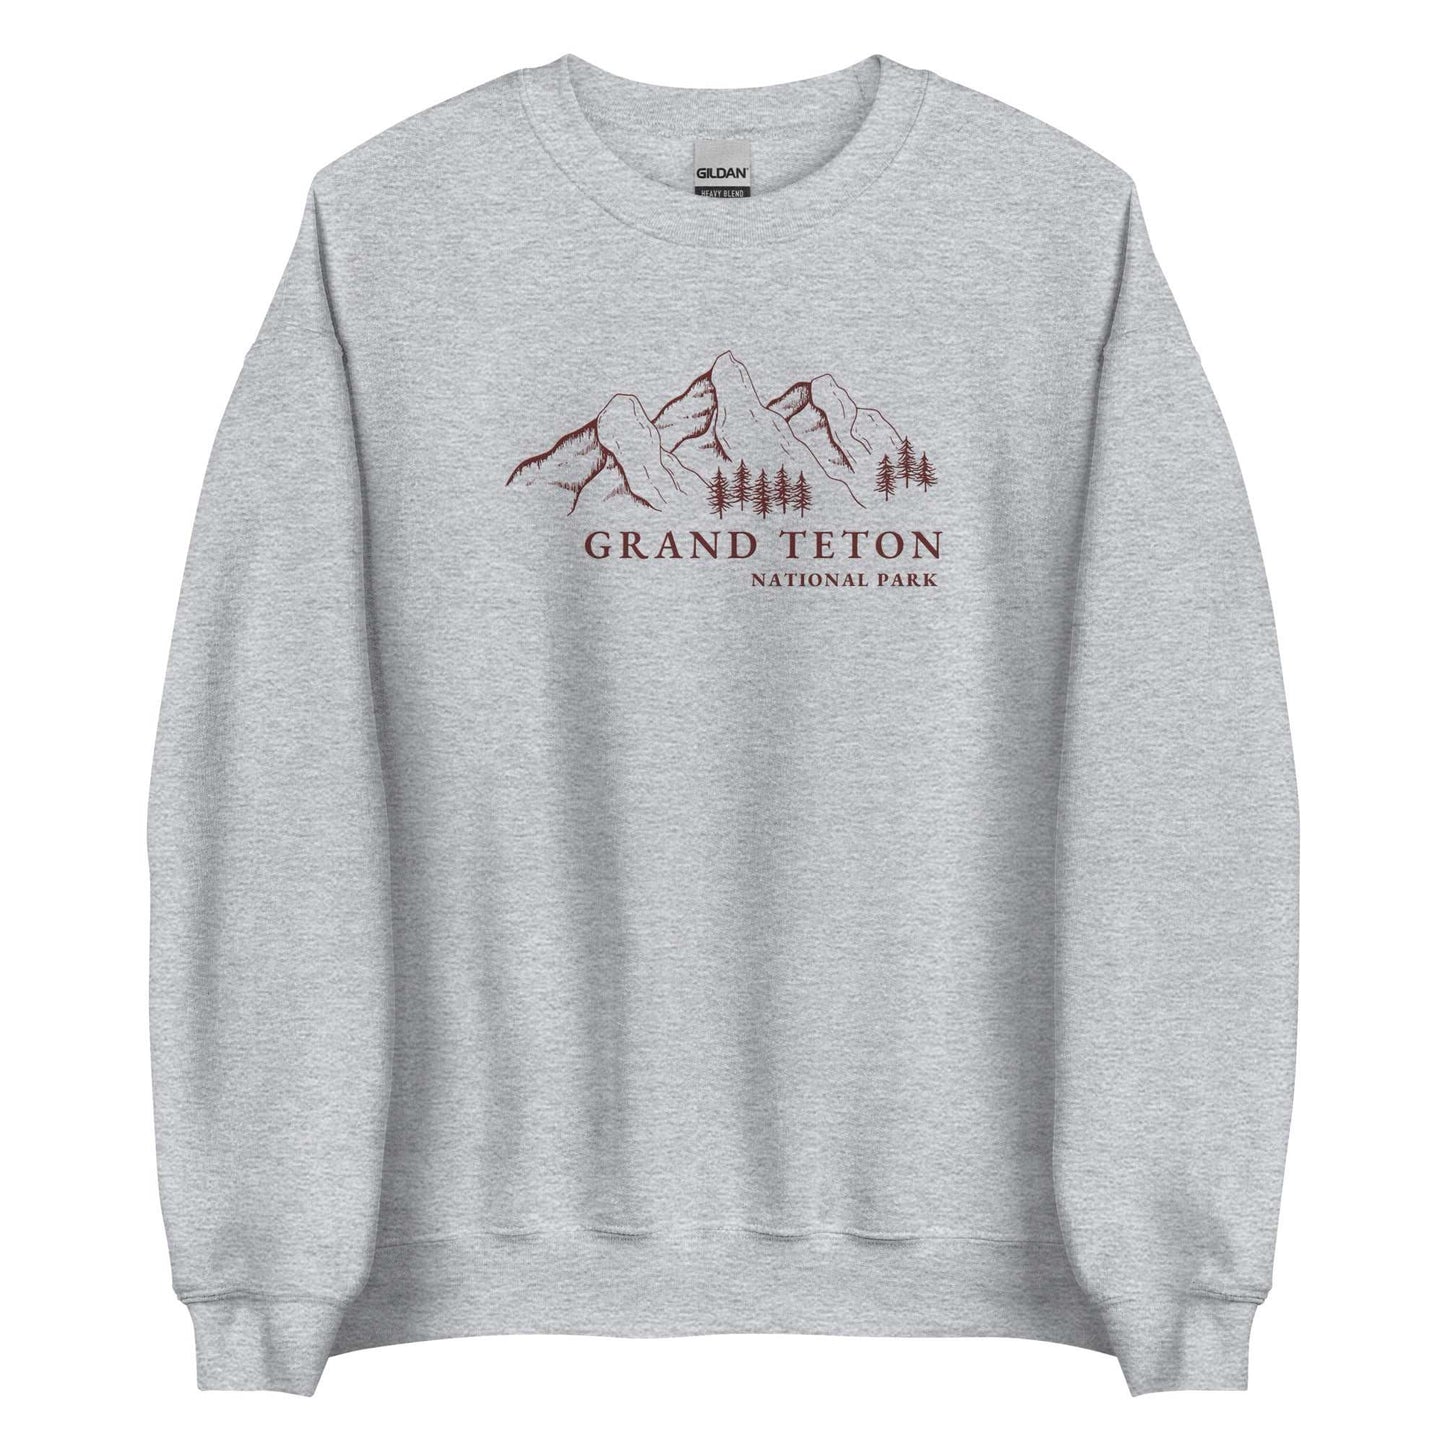 Grand Teton National Park Embroidered Crewneck SweaterBring the majesty of Grand Teton National Park into your wardrobe with this embroidered boyfriend crewneck sweater inspired by the iconic Rocky Mountains that drew y